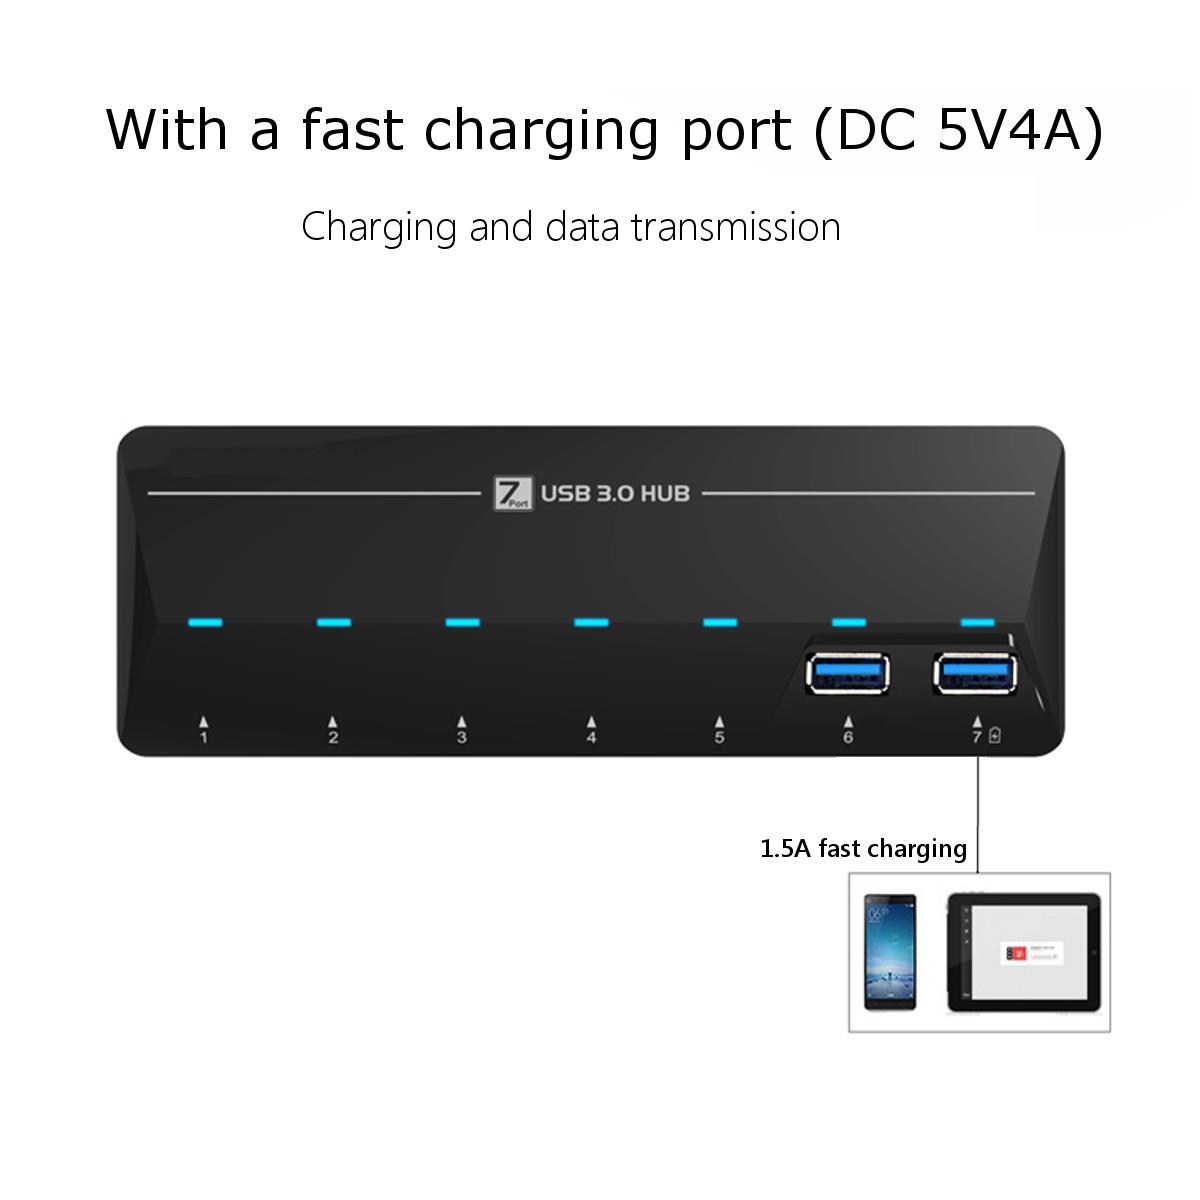 High Speed USB 3.0 7 Ports Hub with 1.5A Quick Charge Port 46